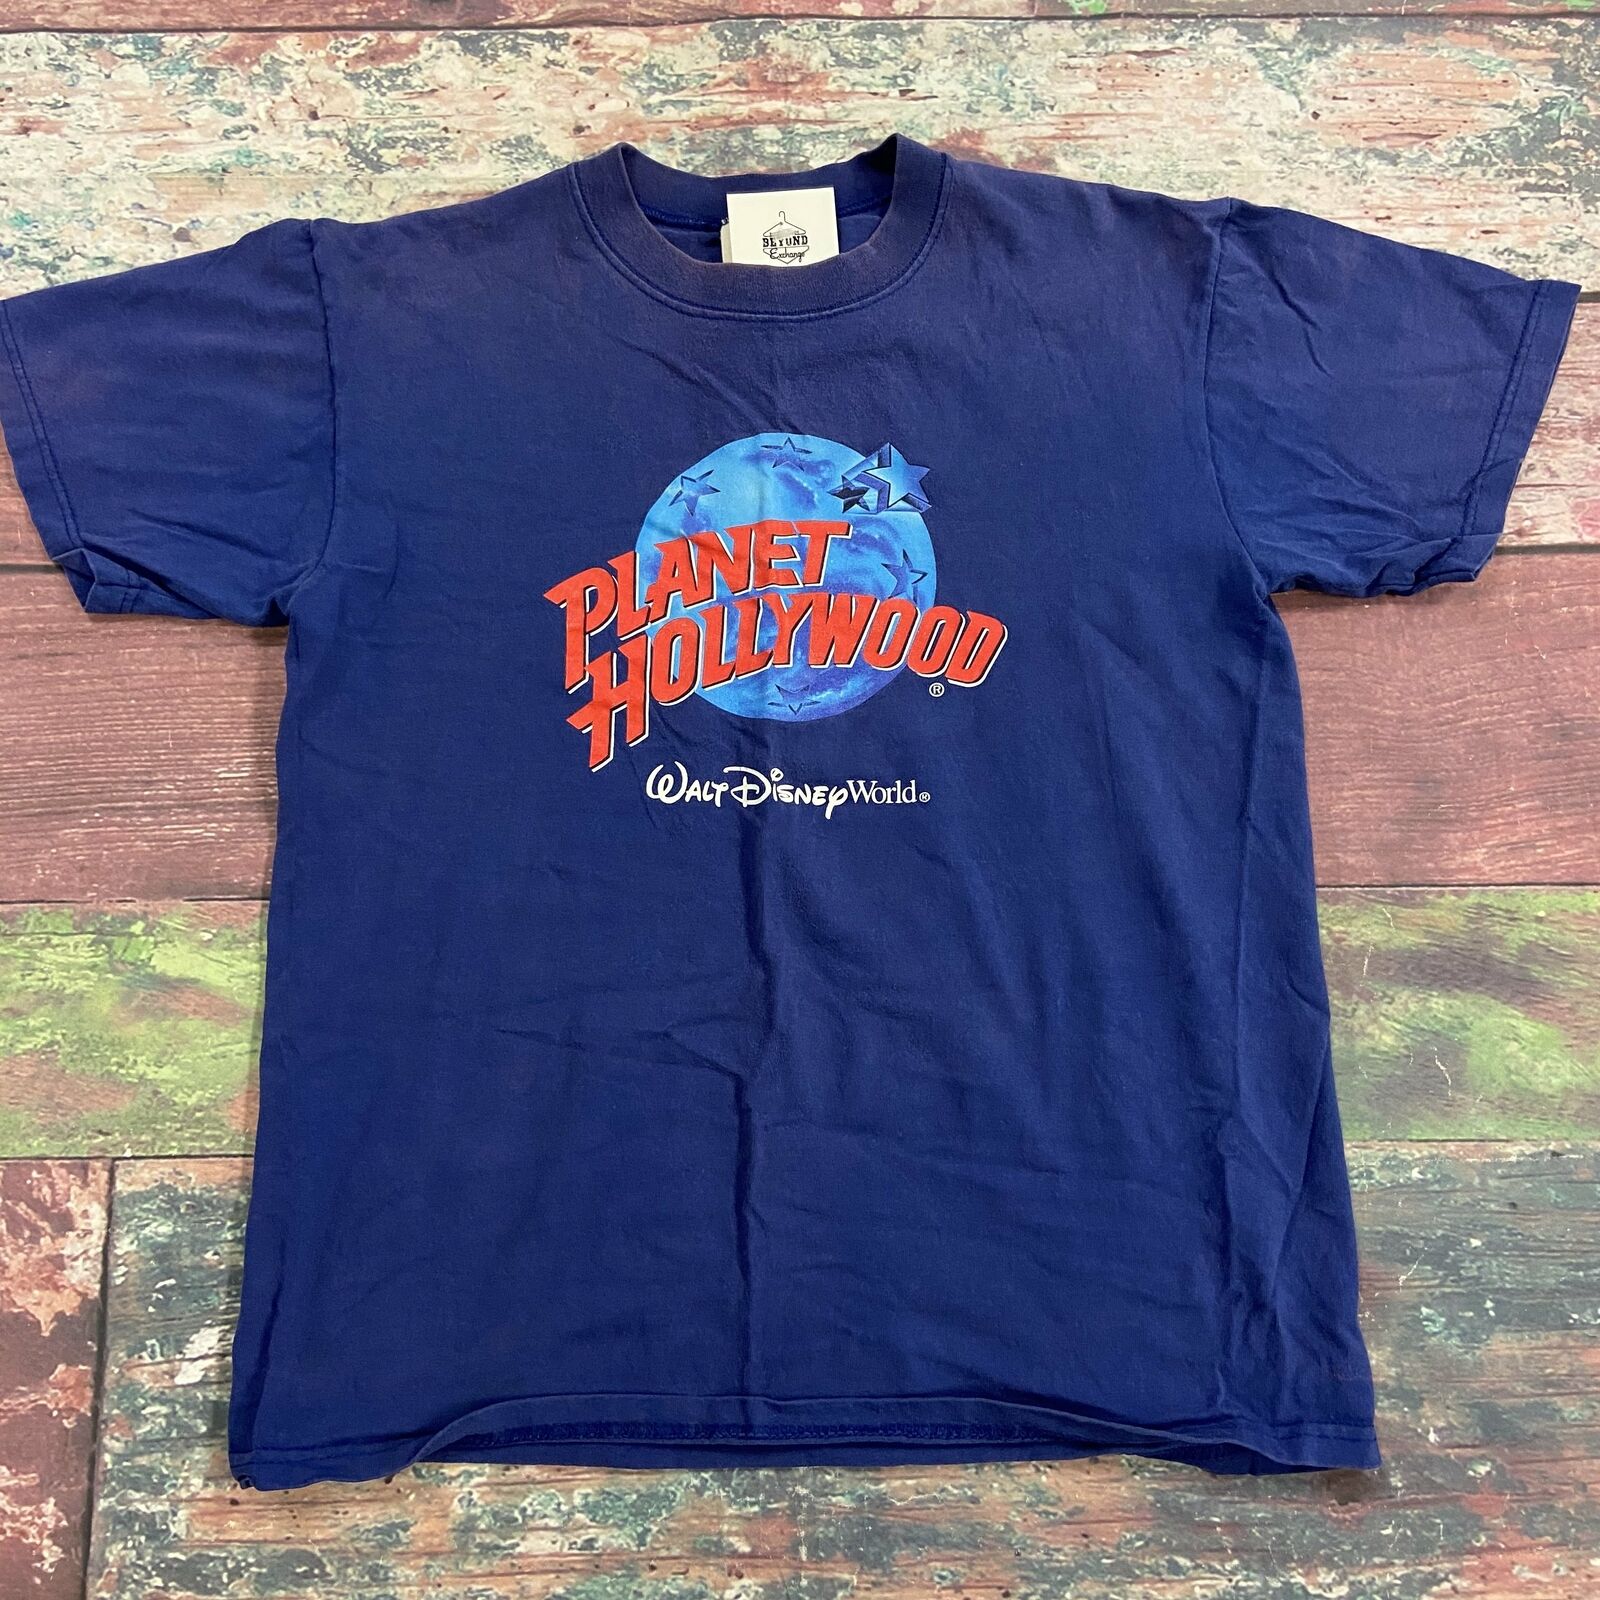 Vintage Planet Hollywood Disney World 1991 Blue T-Shirt Men Size S Made In USA *